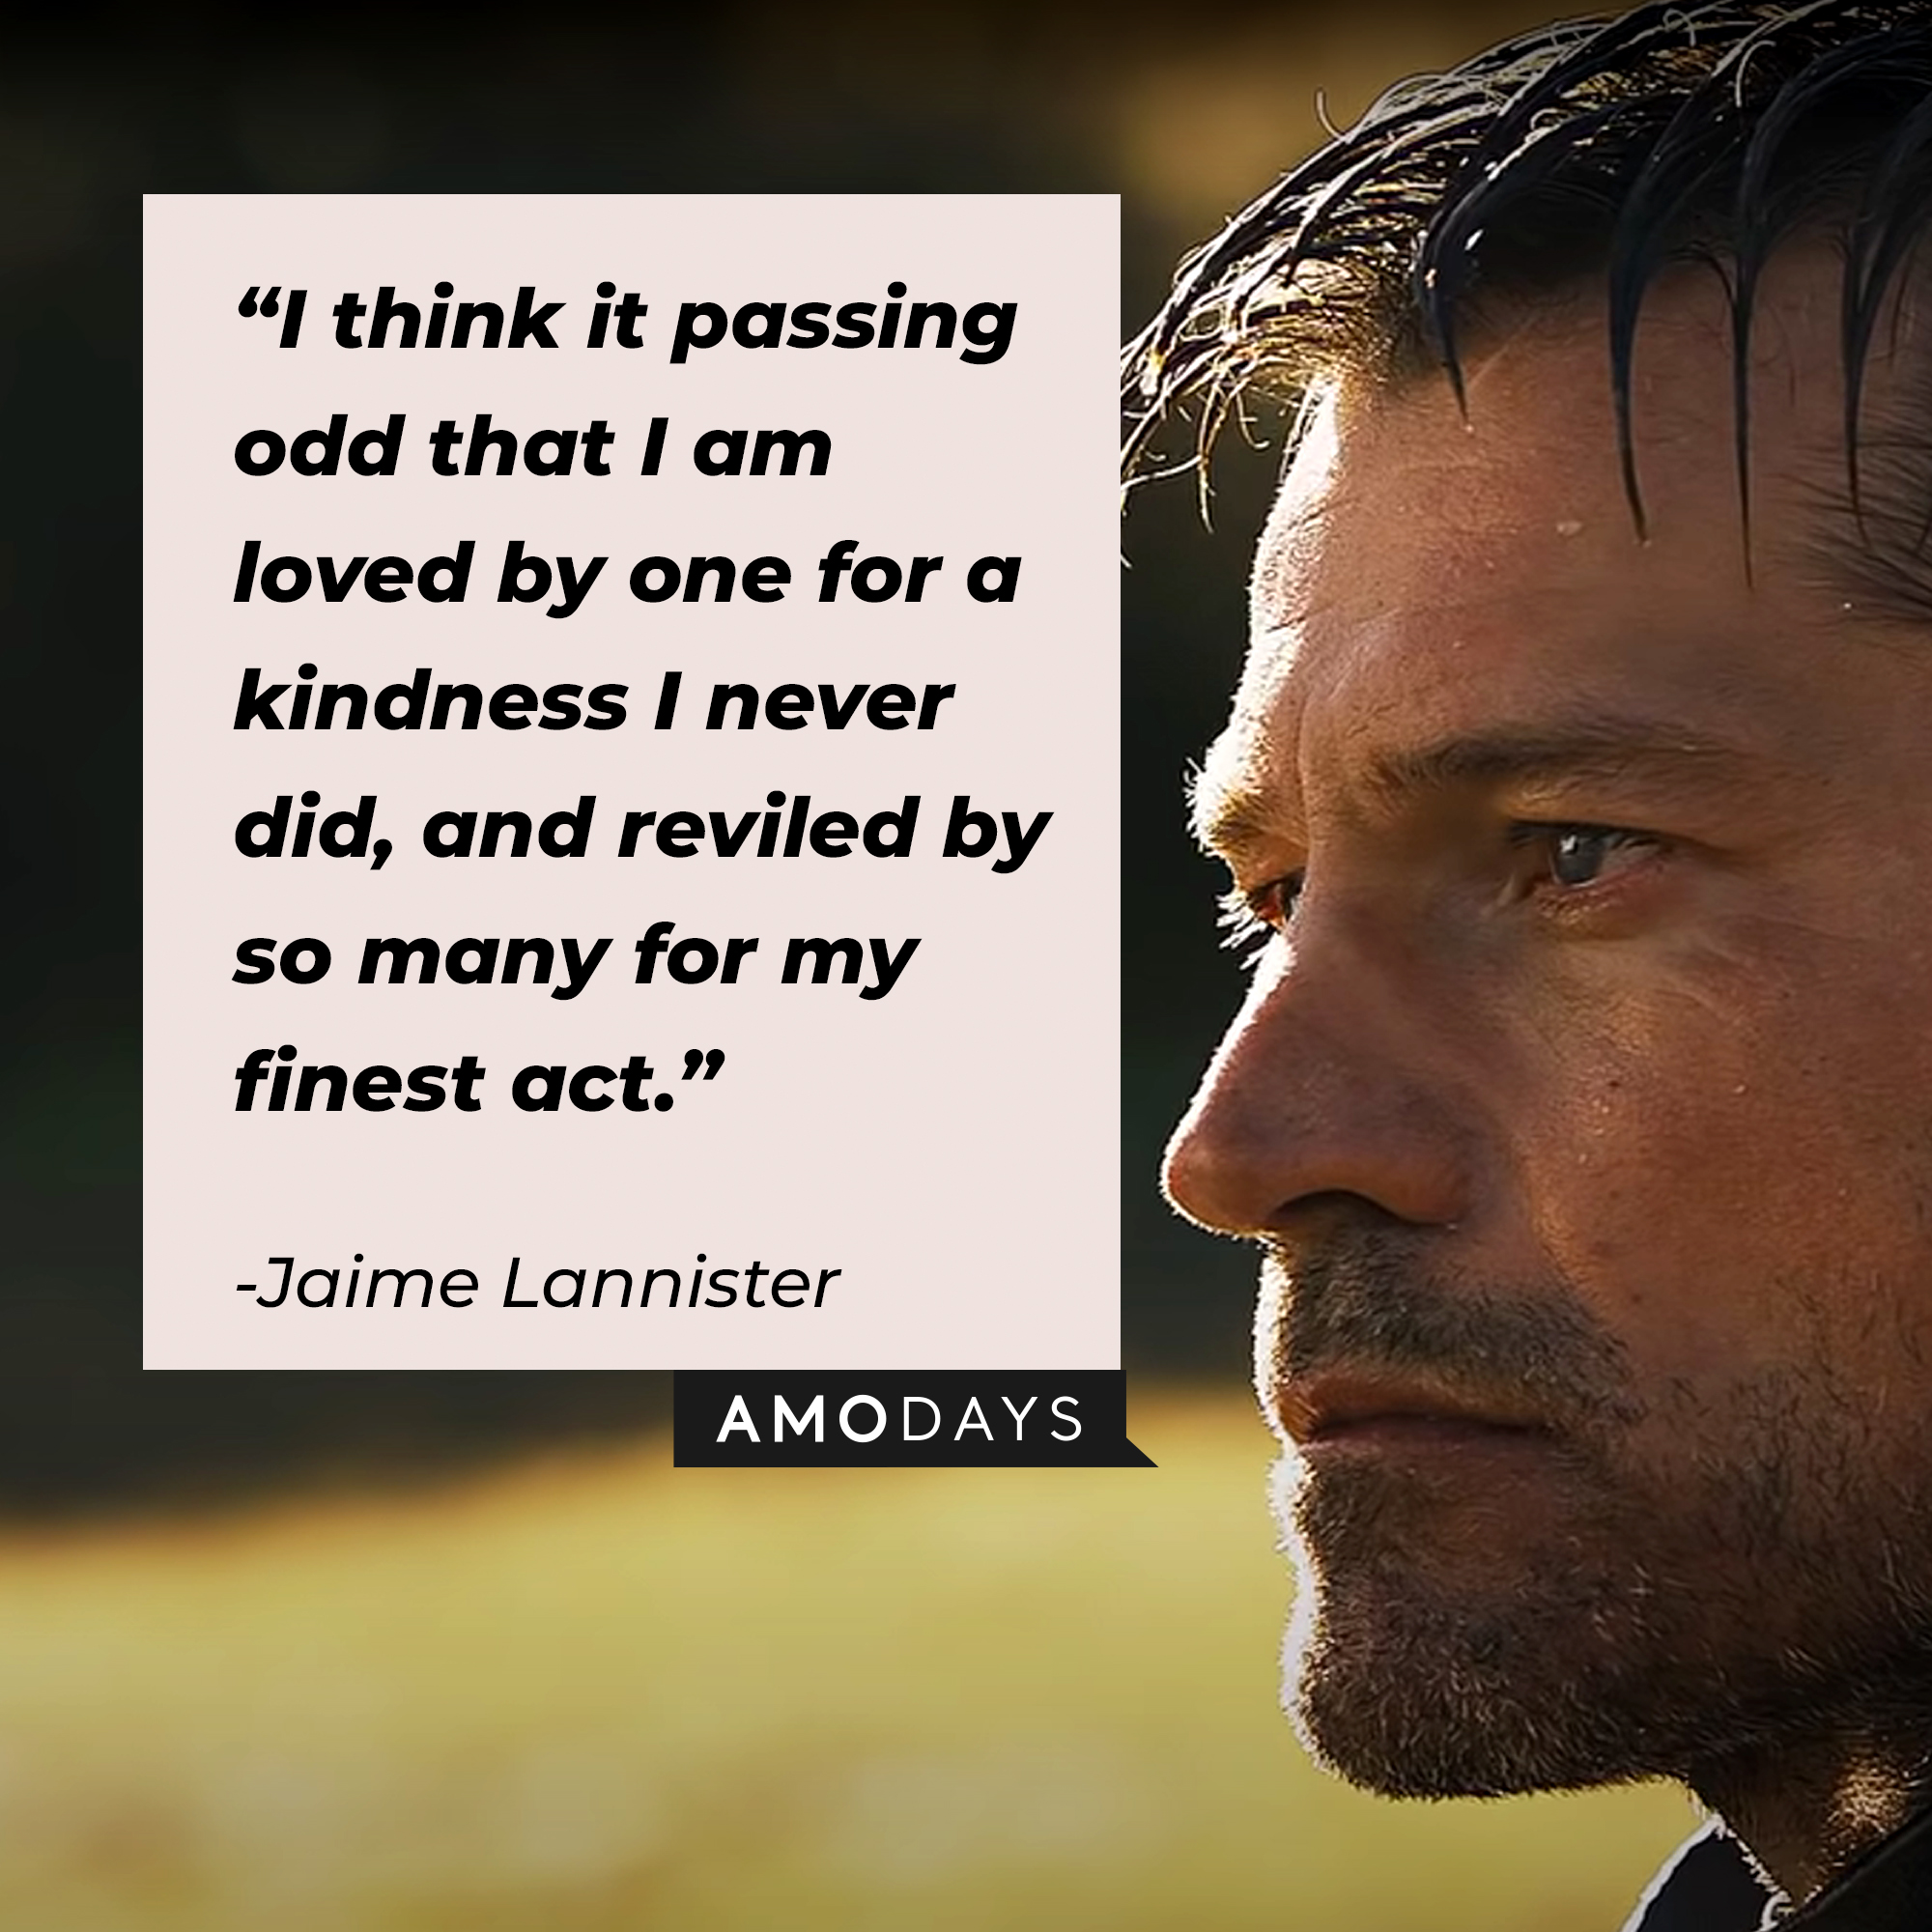 An image of Jaime Lannister, played by Nikolaj Coster-Waldau, with his quote: “I think it passing odd that I am loved by one for a kindness I never did, and reviled by so many for my finest act.” | Source: facebook.com/Game of Thrones